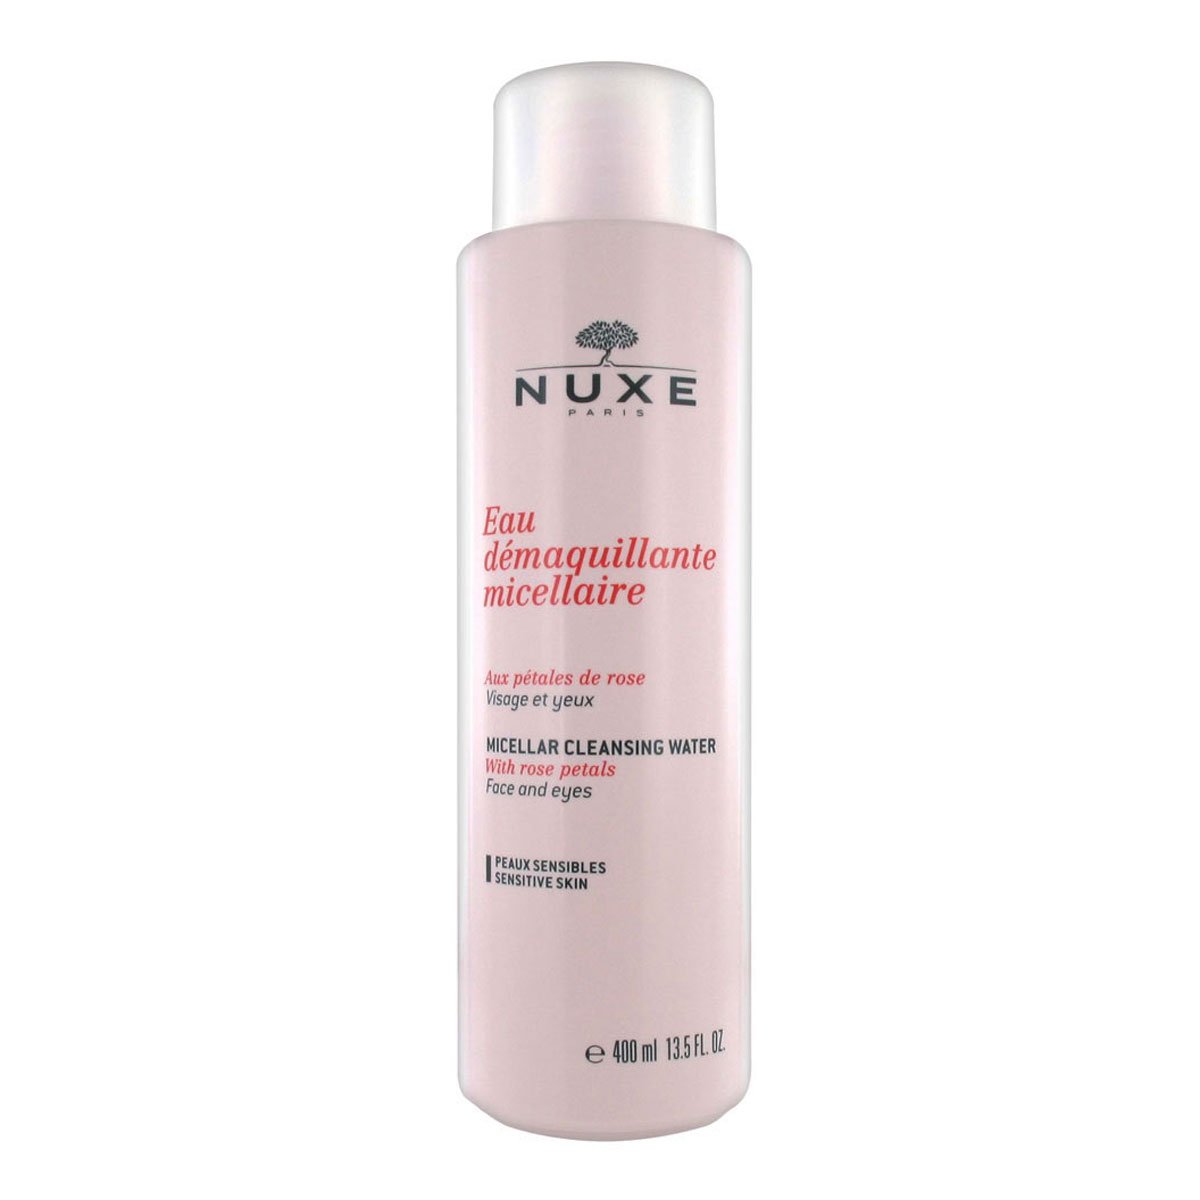 Nuxe Micellar Cleansing Water with Rose Petals 400 ml